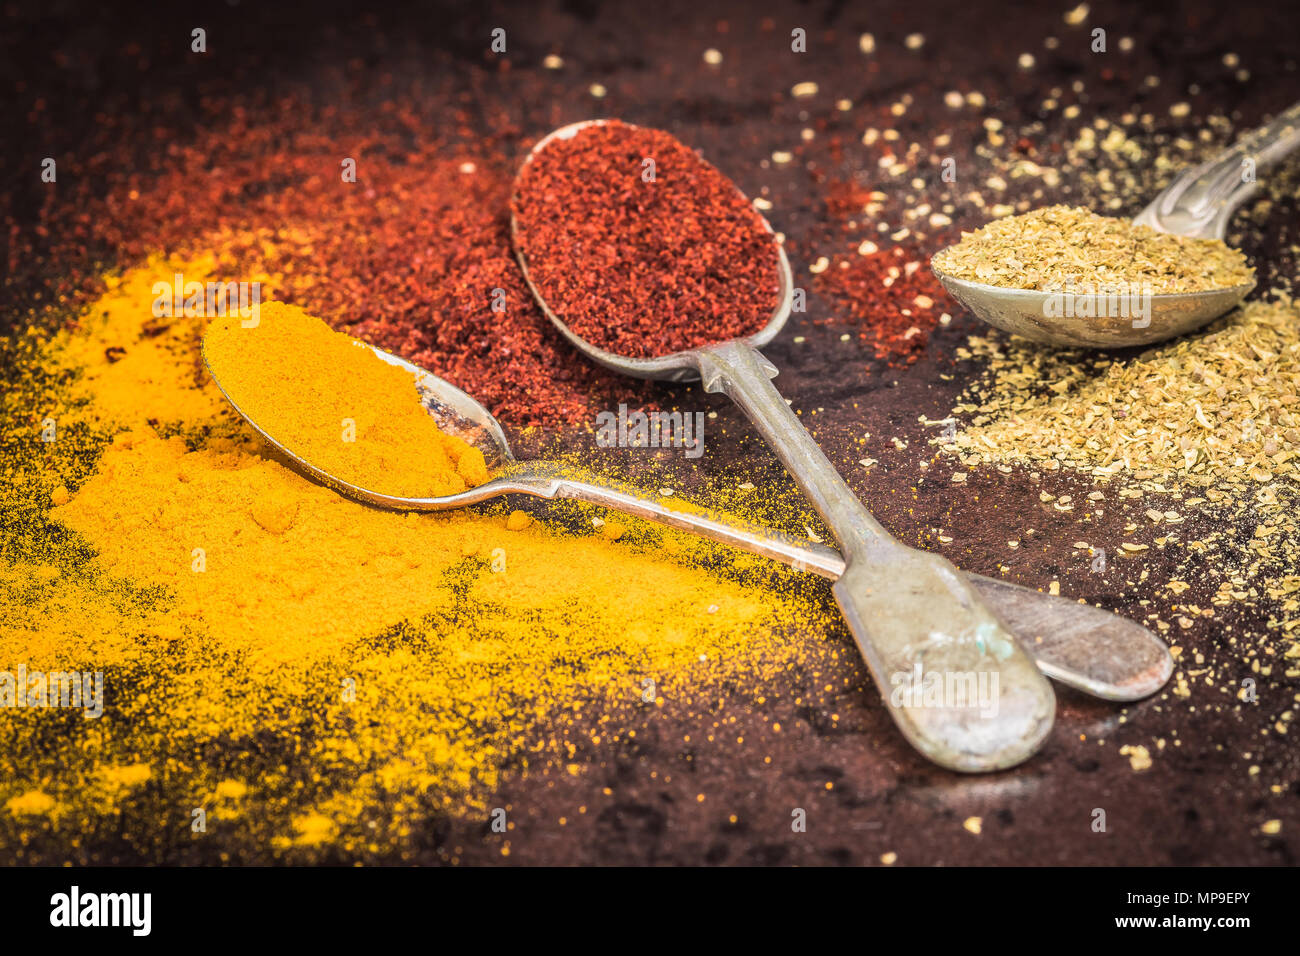 Various spices such as Turmeric & paprika on spoons, close up Stock Photo